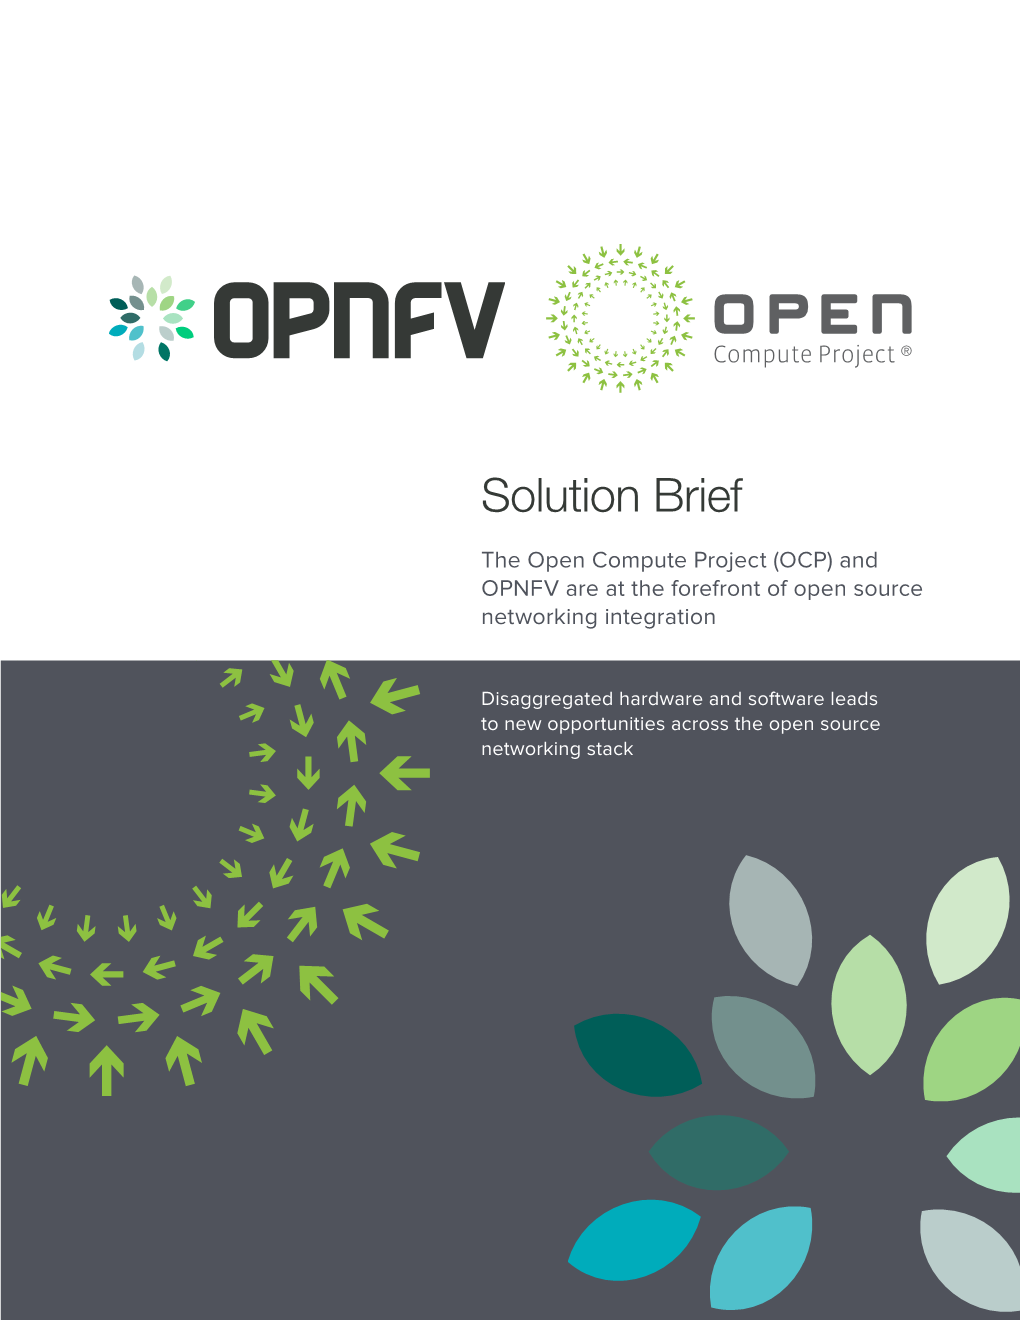 Solution Brief: OPNFV + Open Compute Project